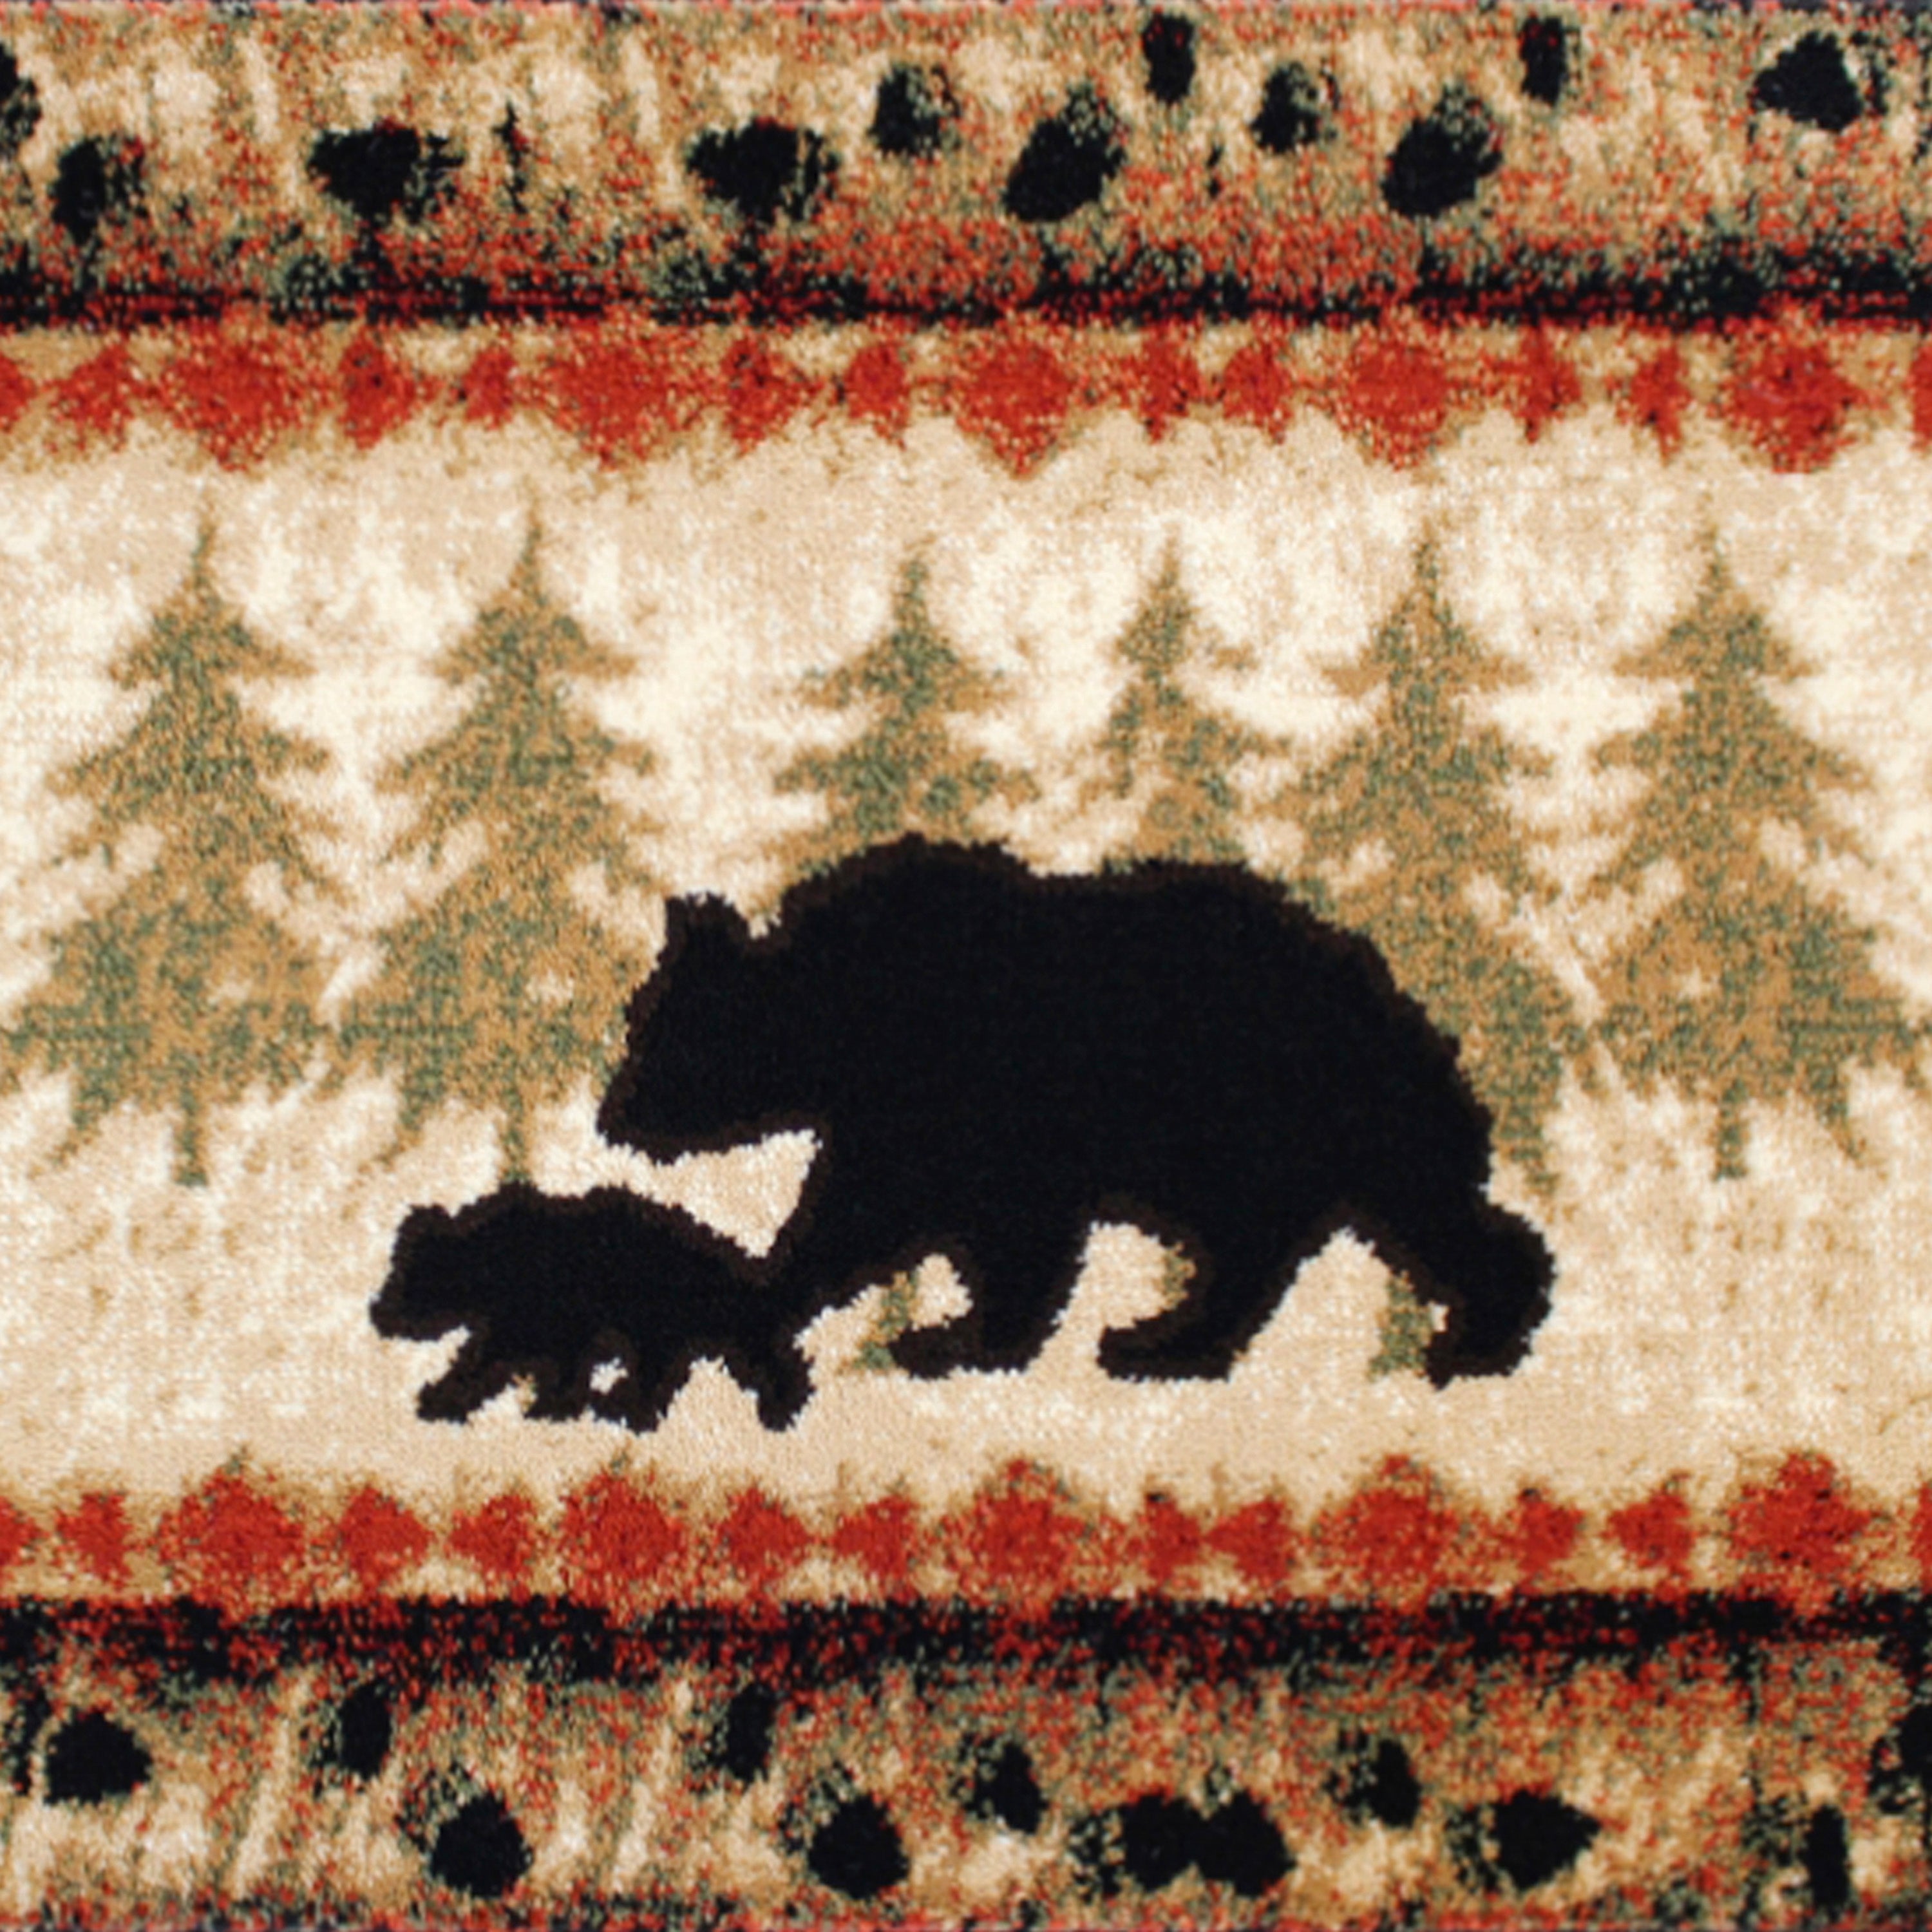 Ursus Collection Rustic Lodge Wandering Black Bear and Cub Area Rug with Jute Backing-Indoor Area Rug-Flash Furniture-Wall2Wall Furnishings